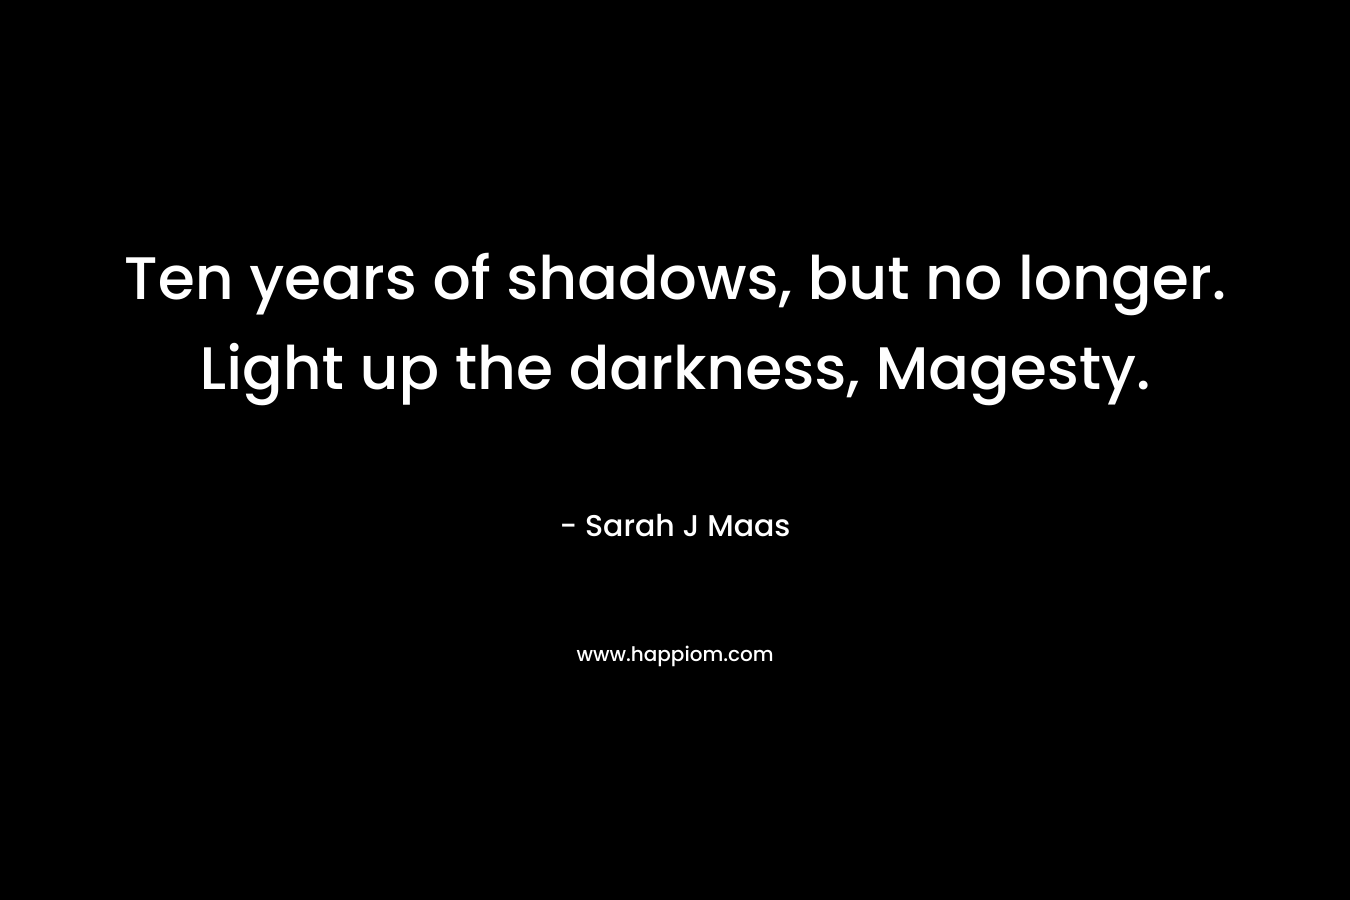 Ten years of shadows, but no longer. Light up the darkness, Magesty.